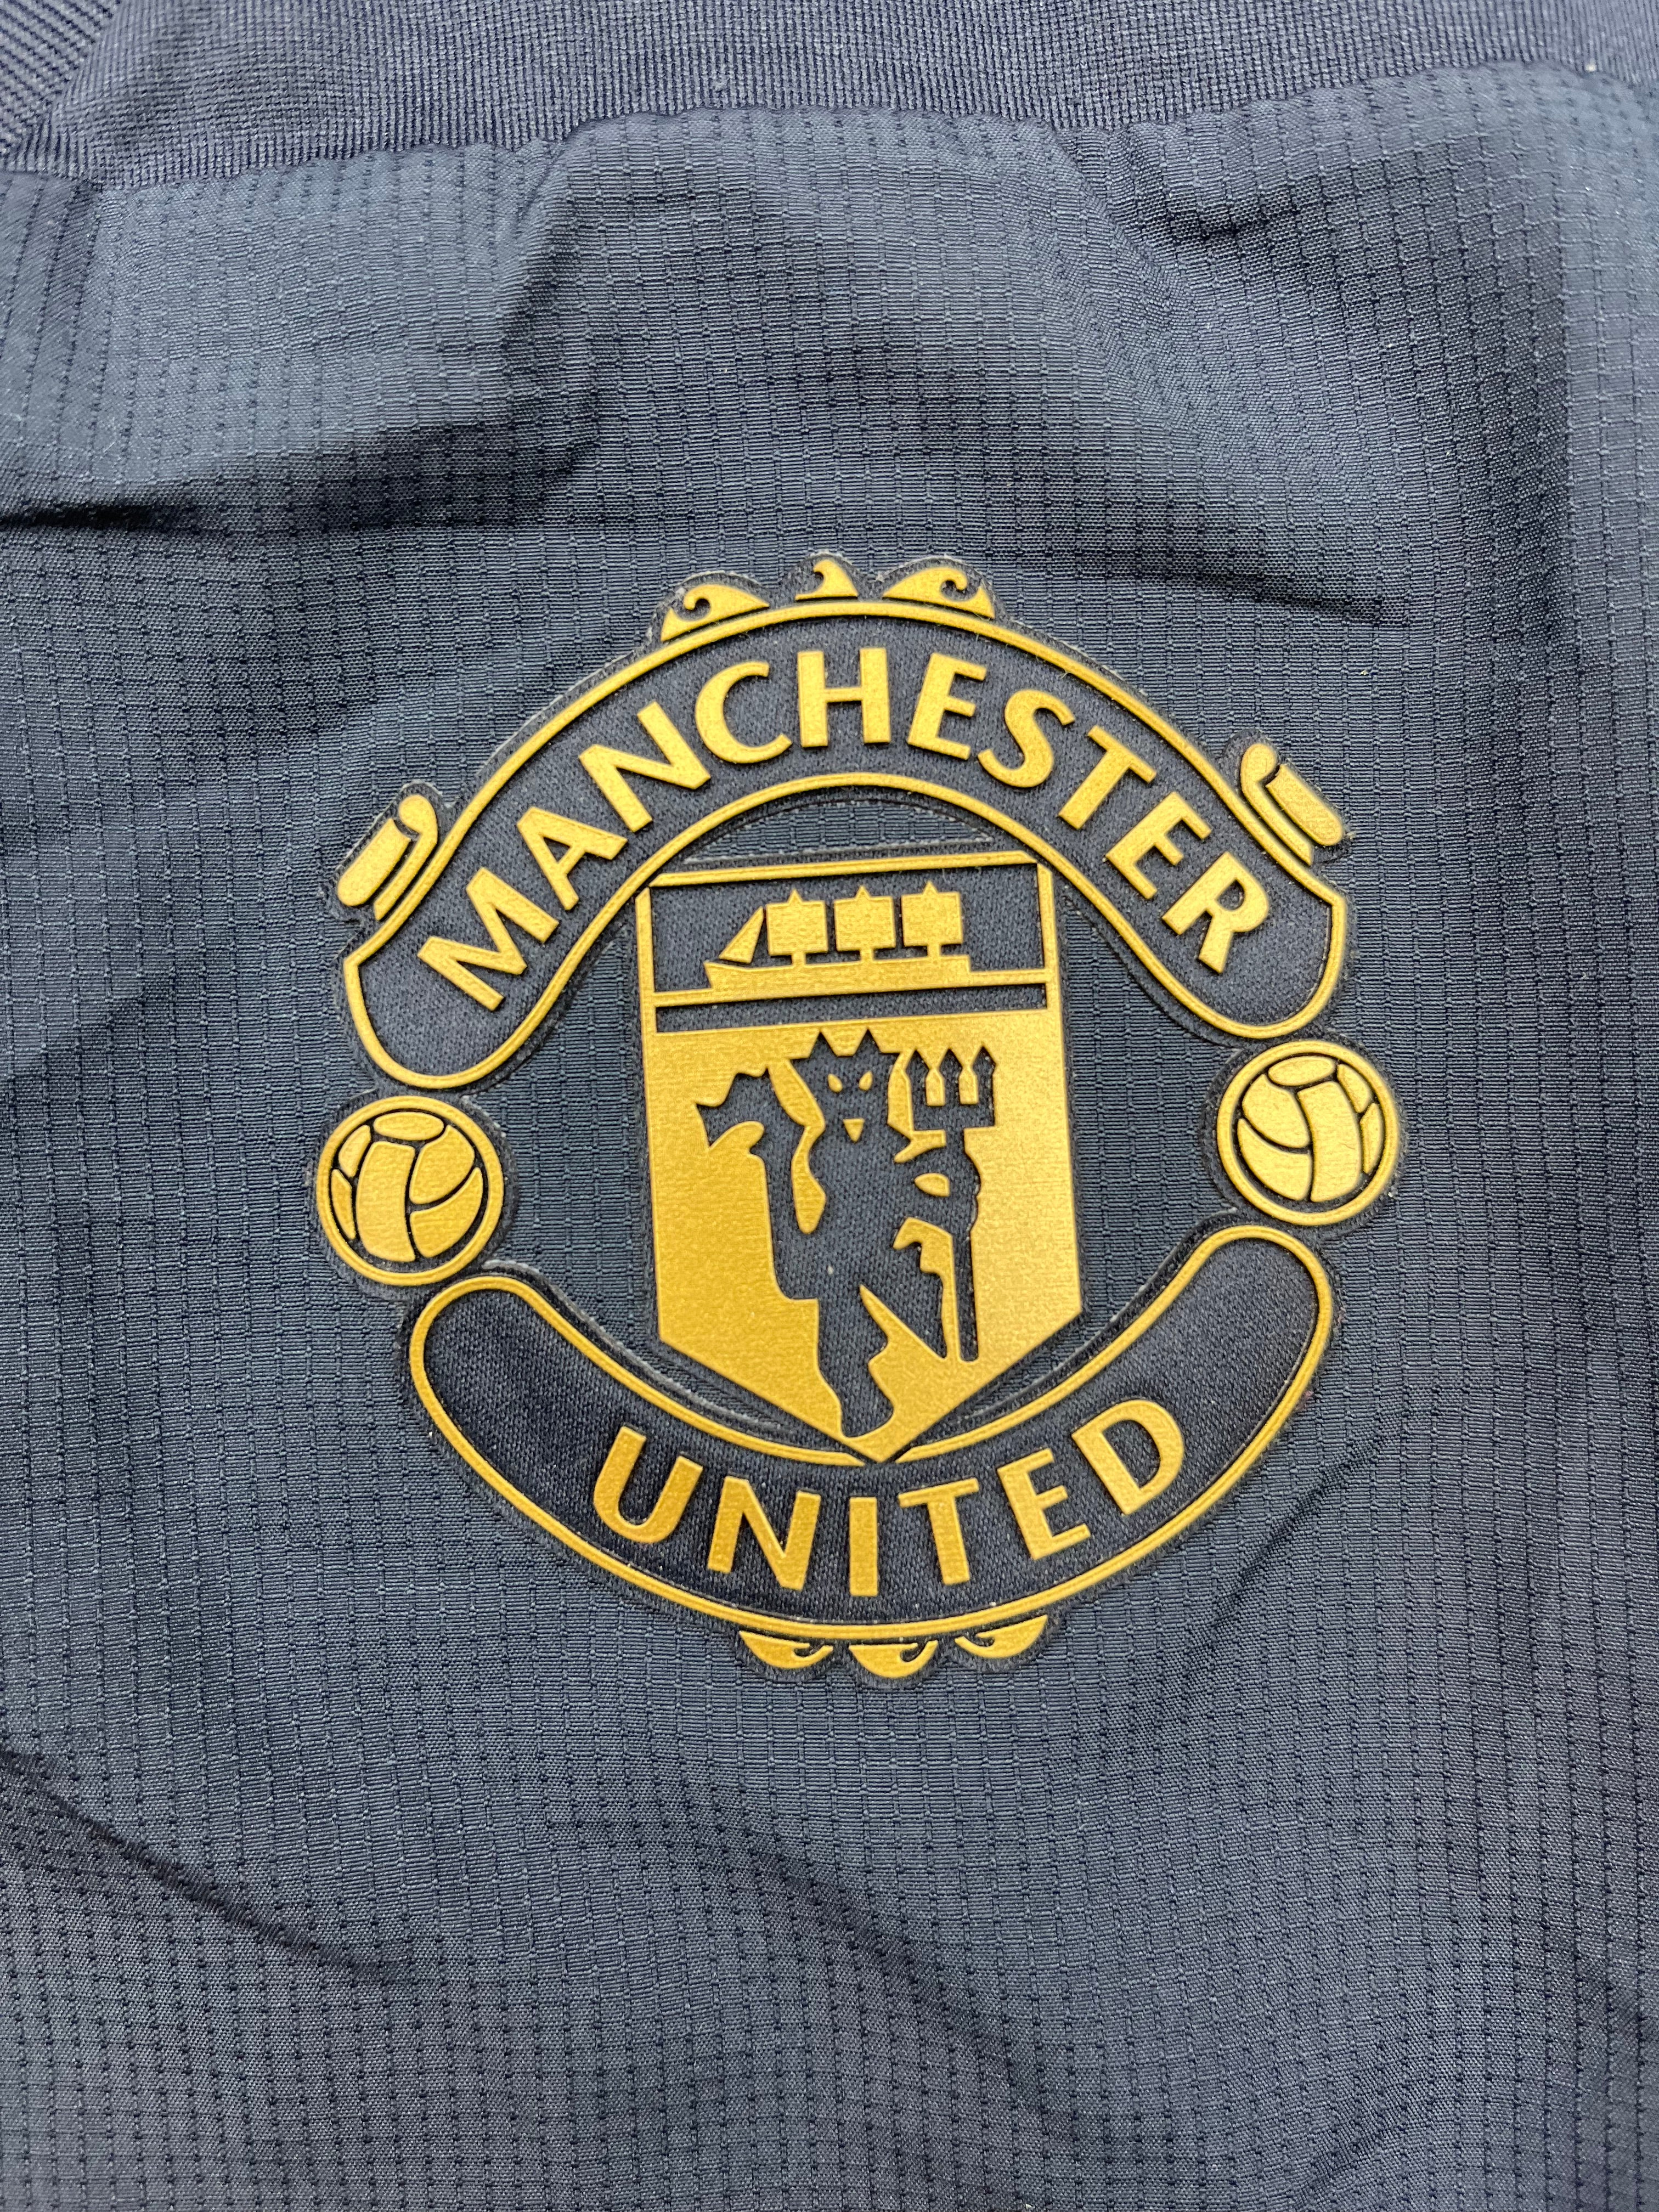 2018/19 Manchester United Training Top (M) 9/10